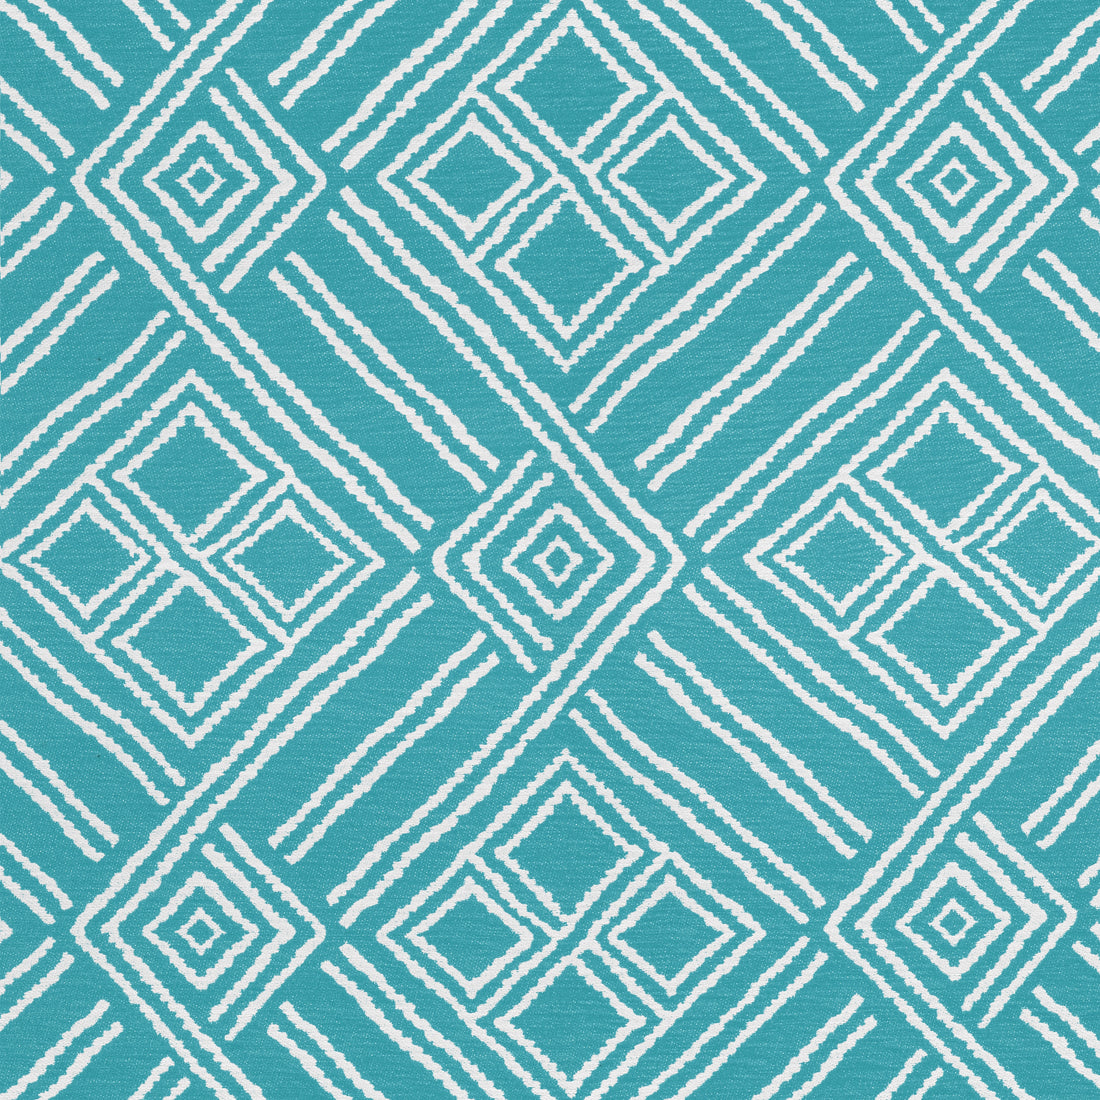 Terraza fabric in capri color - pattern number W8611 - by Thibaut in the Villa collection